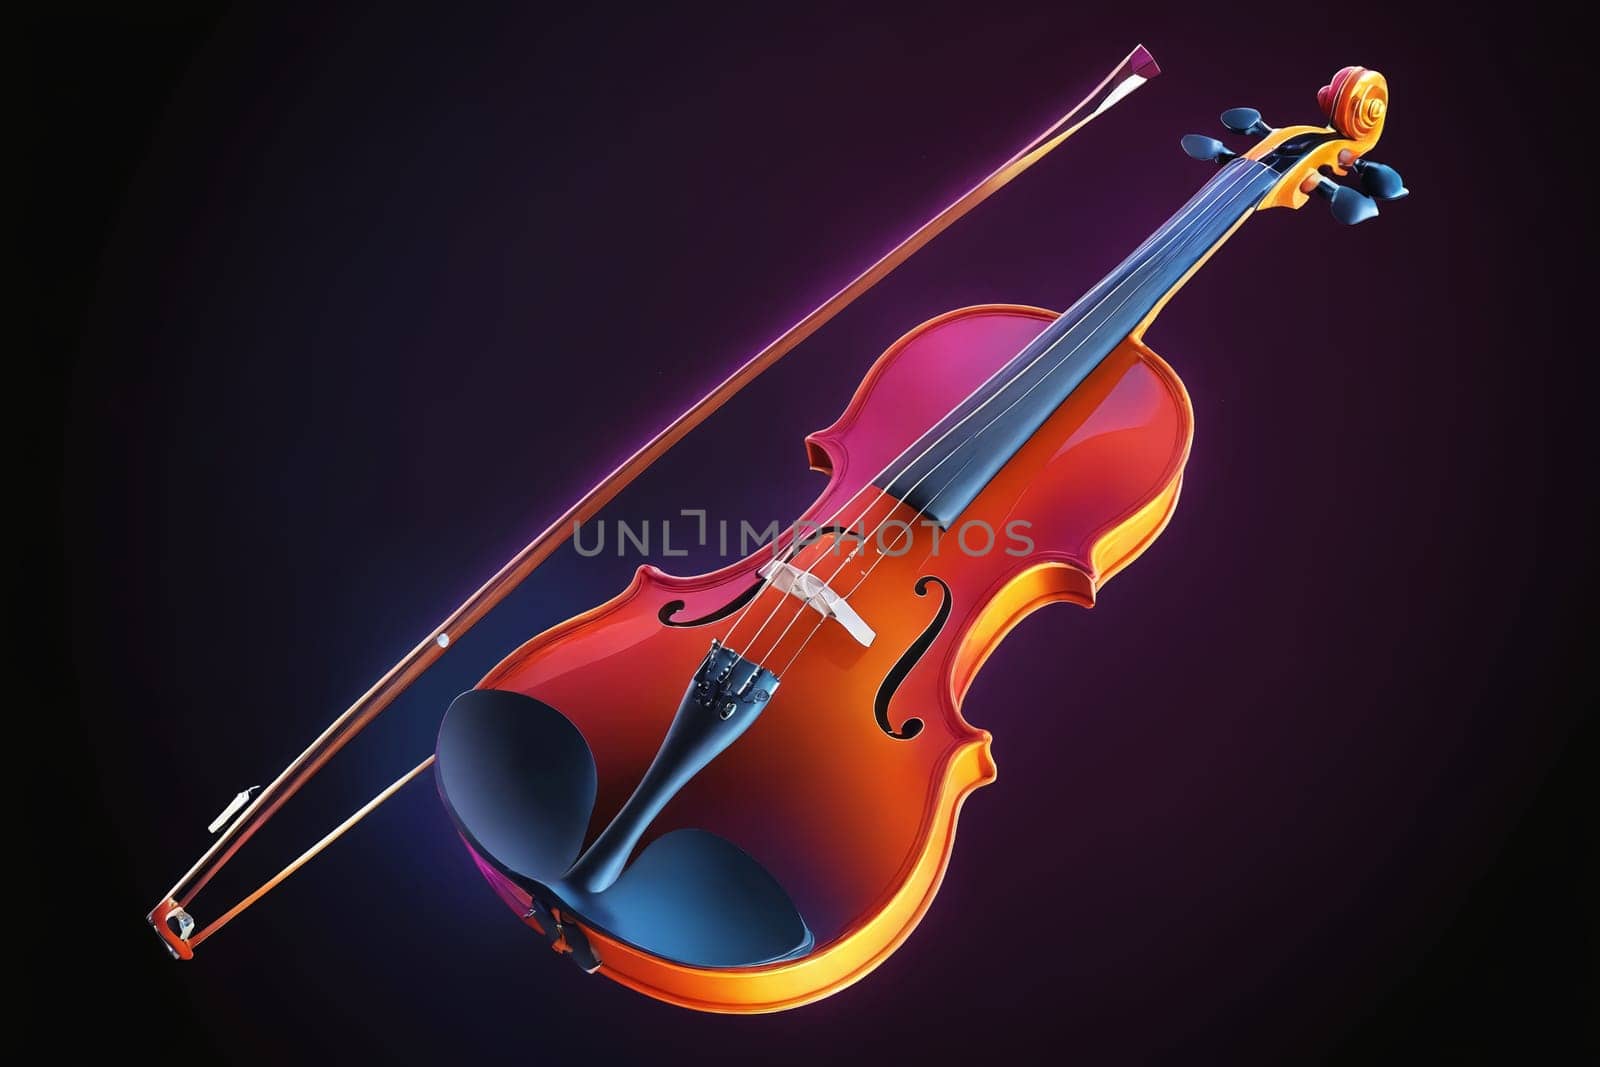 Striking close-up of a violin under a wash of neon purple light, creating a visually electric effect.